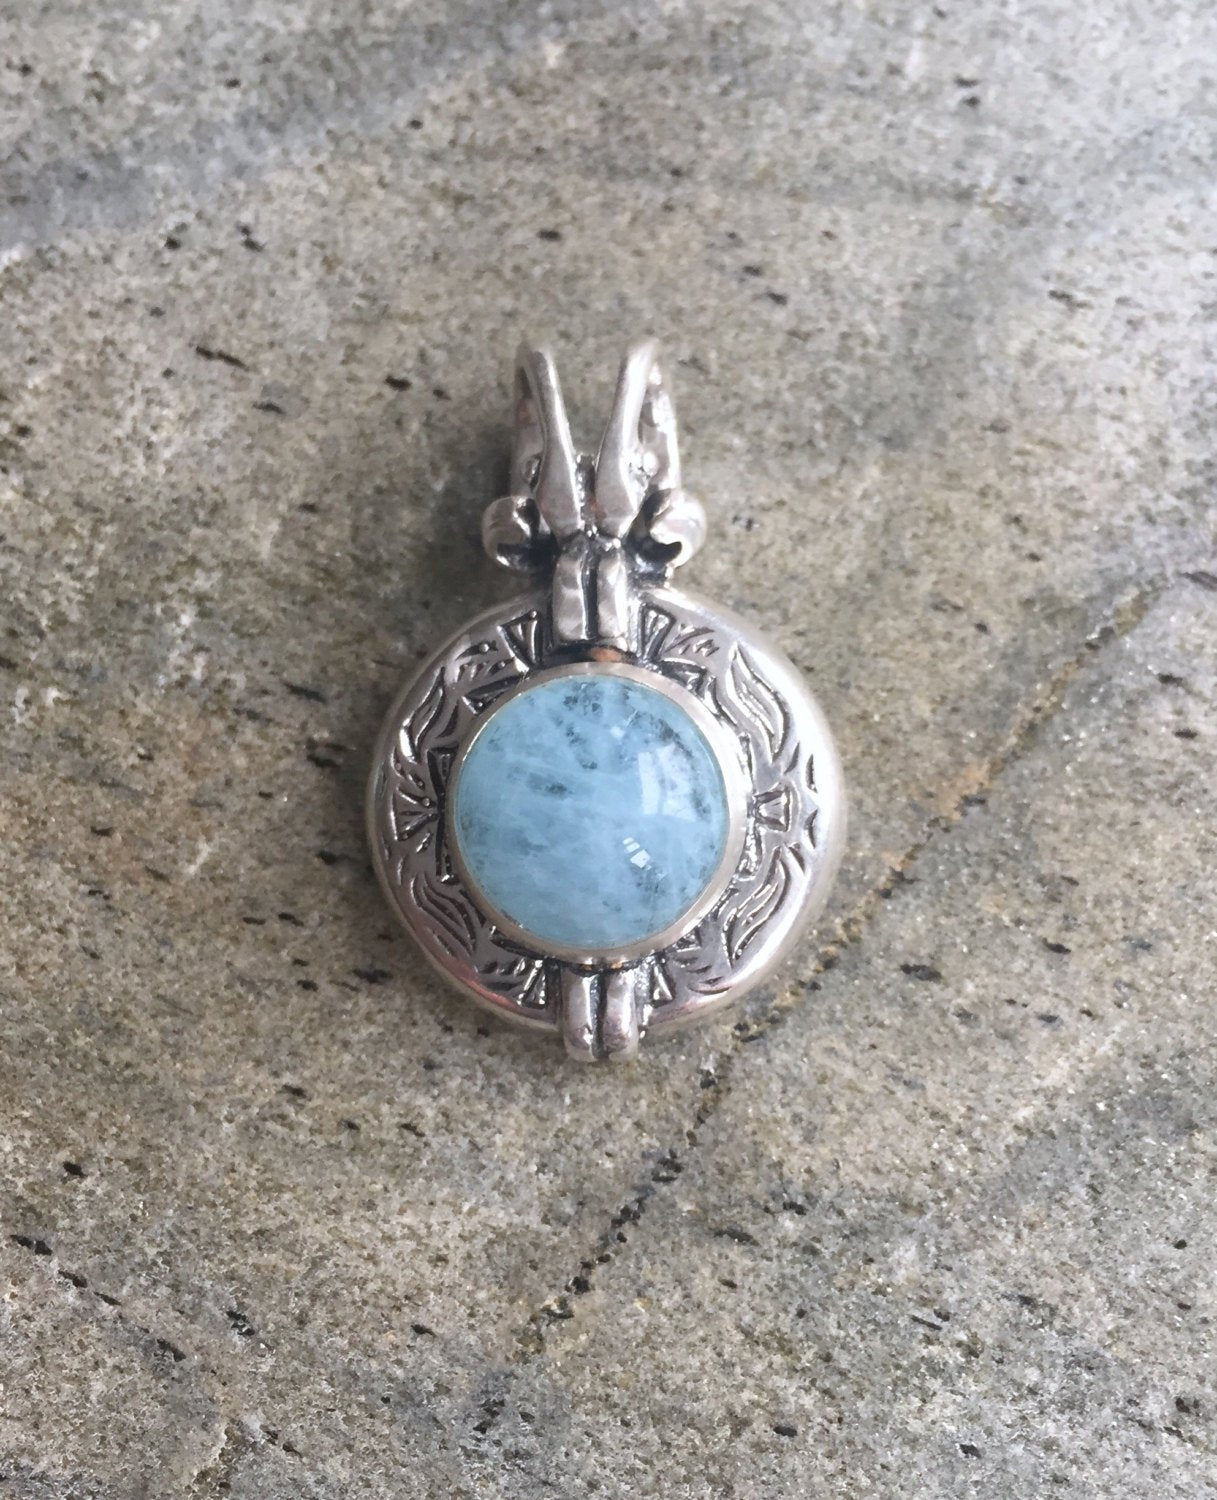 Aquamarine Pendant, Egyptian Jewelry, Natural Aquamarine, March Birthstone, Ancient Egypt Jewelry, Silver Pendant, Solid Silver, Pure Silver